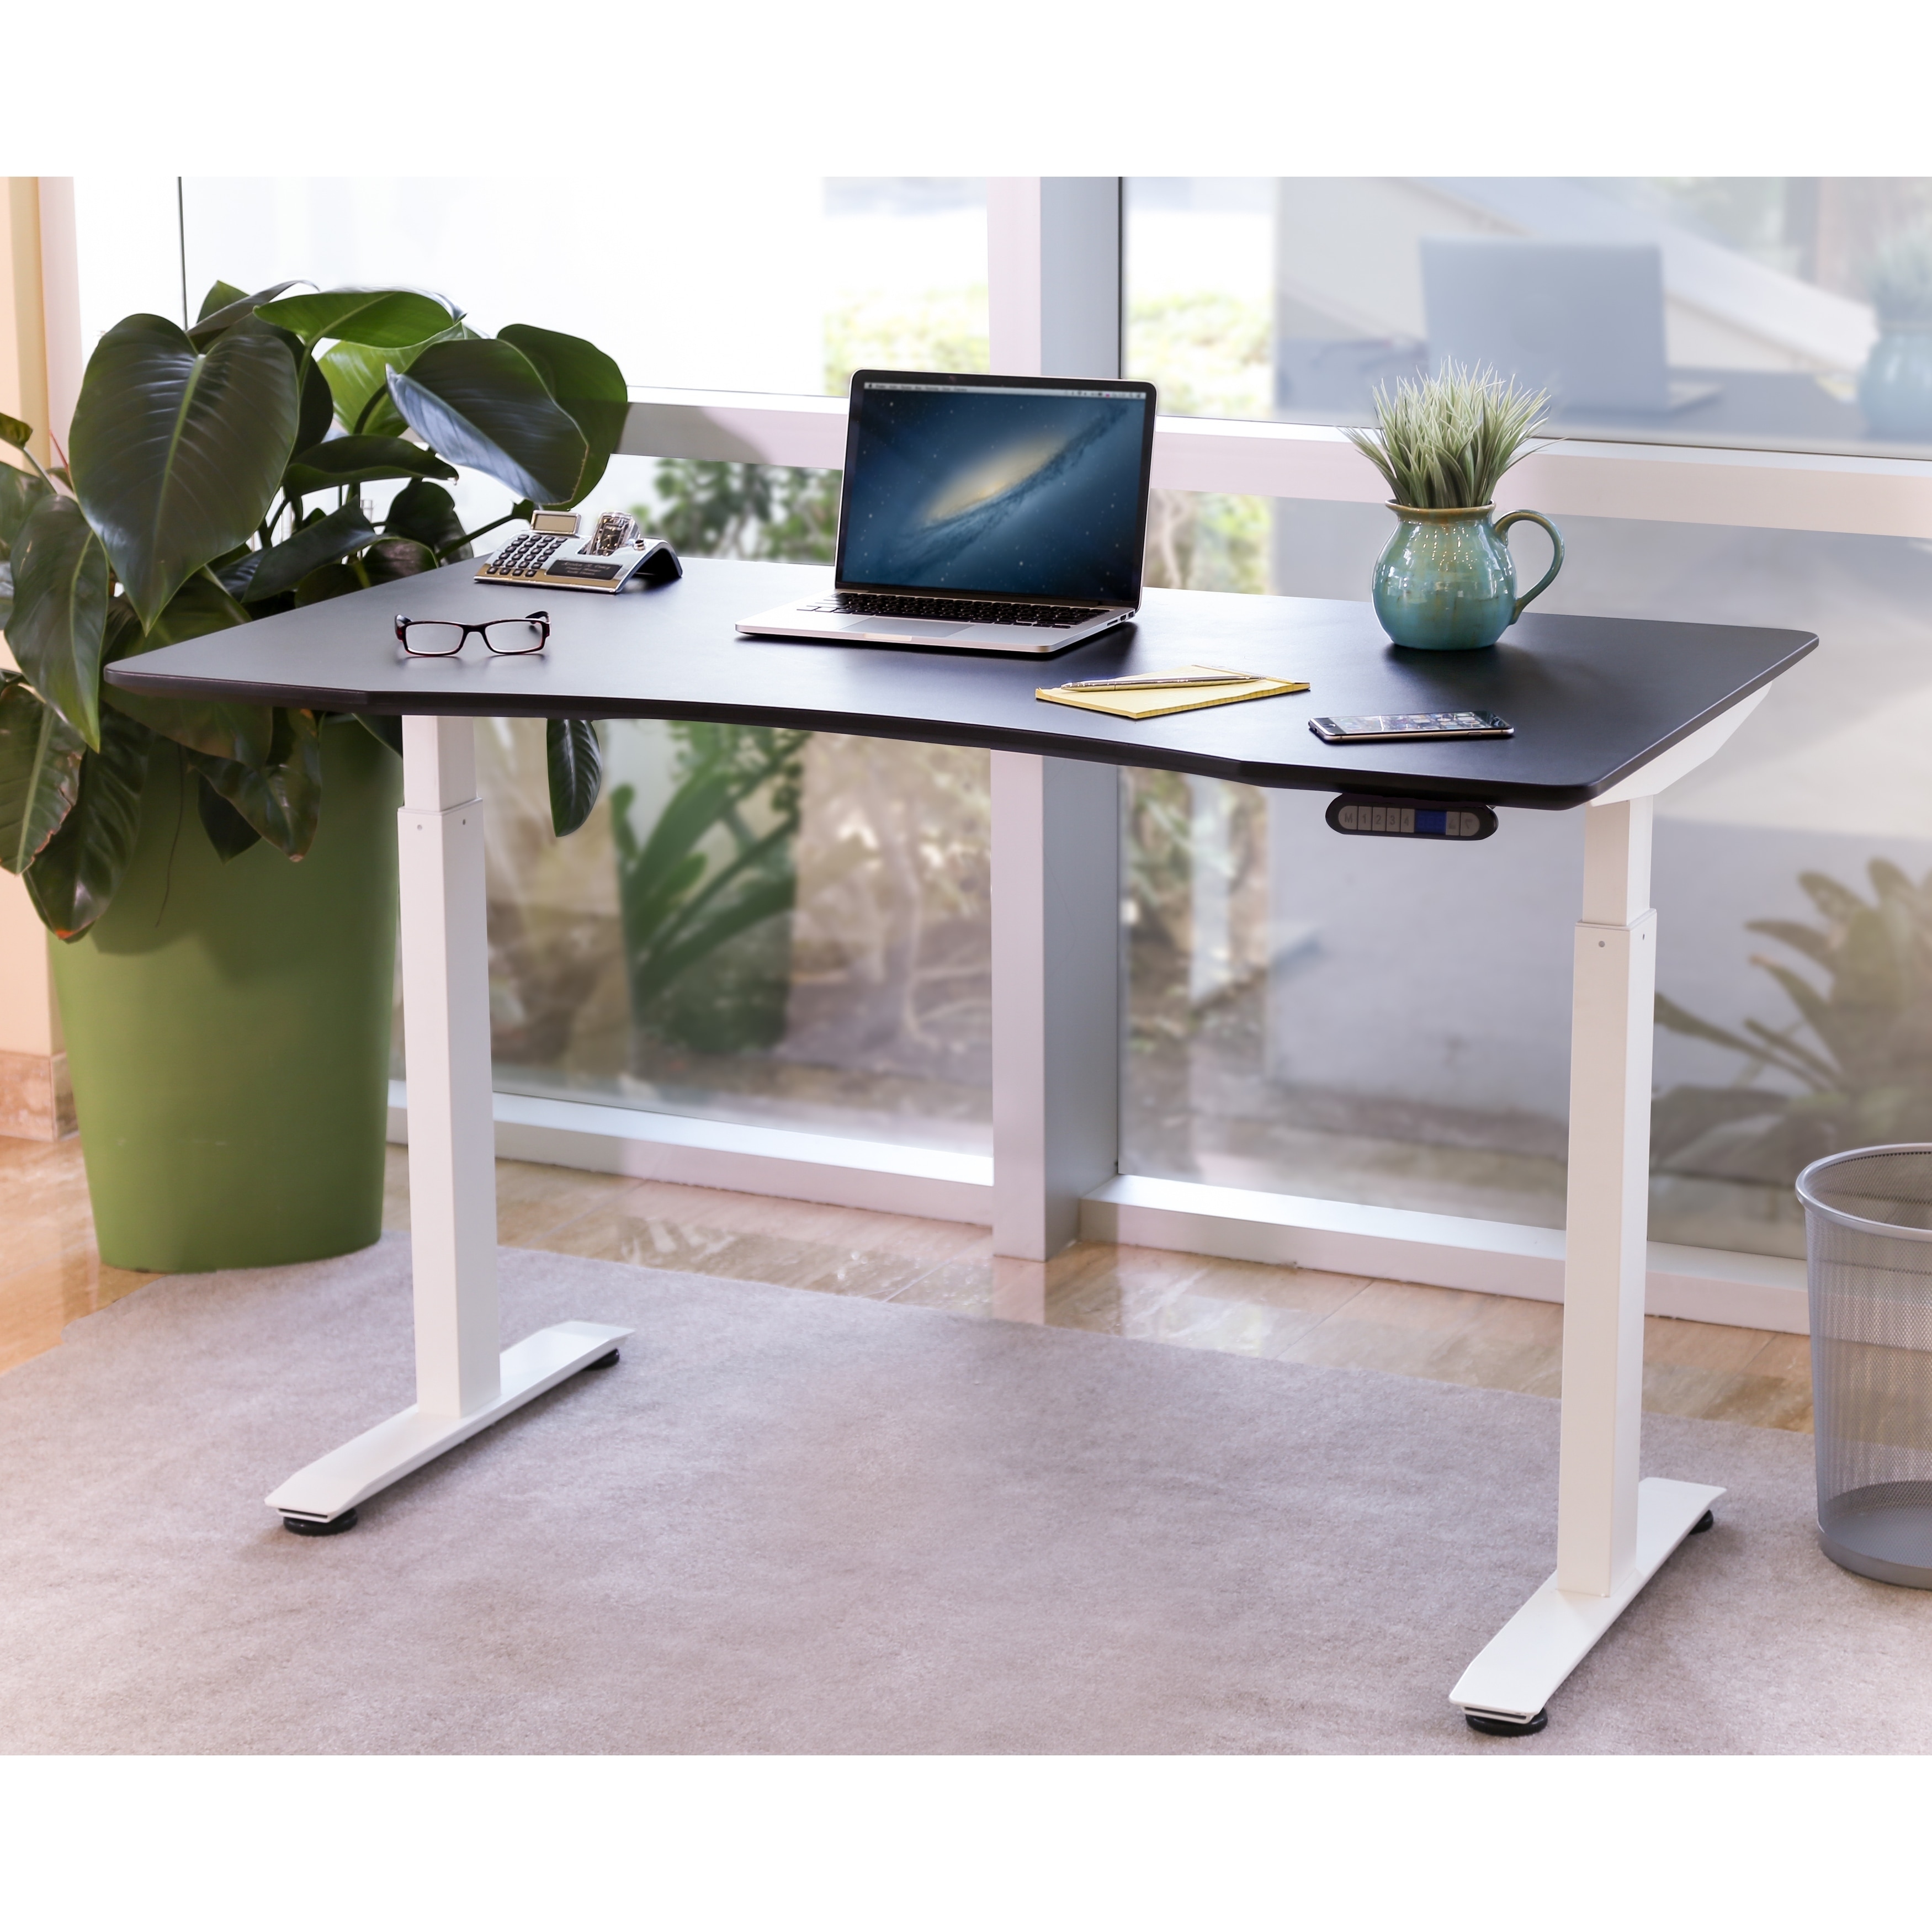 AIRLIFT Black/ White Electric S2 Standing Desk Frame With 54 in Top, Dual Motors (Max. Height 48.4 in) and 4 Memory Buttons